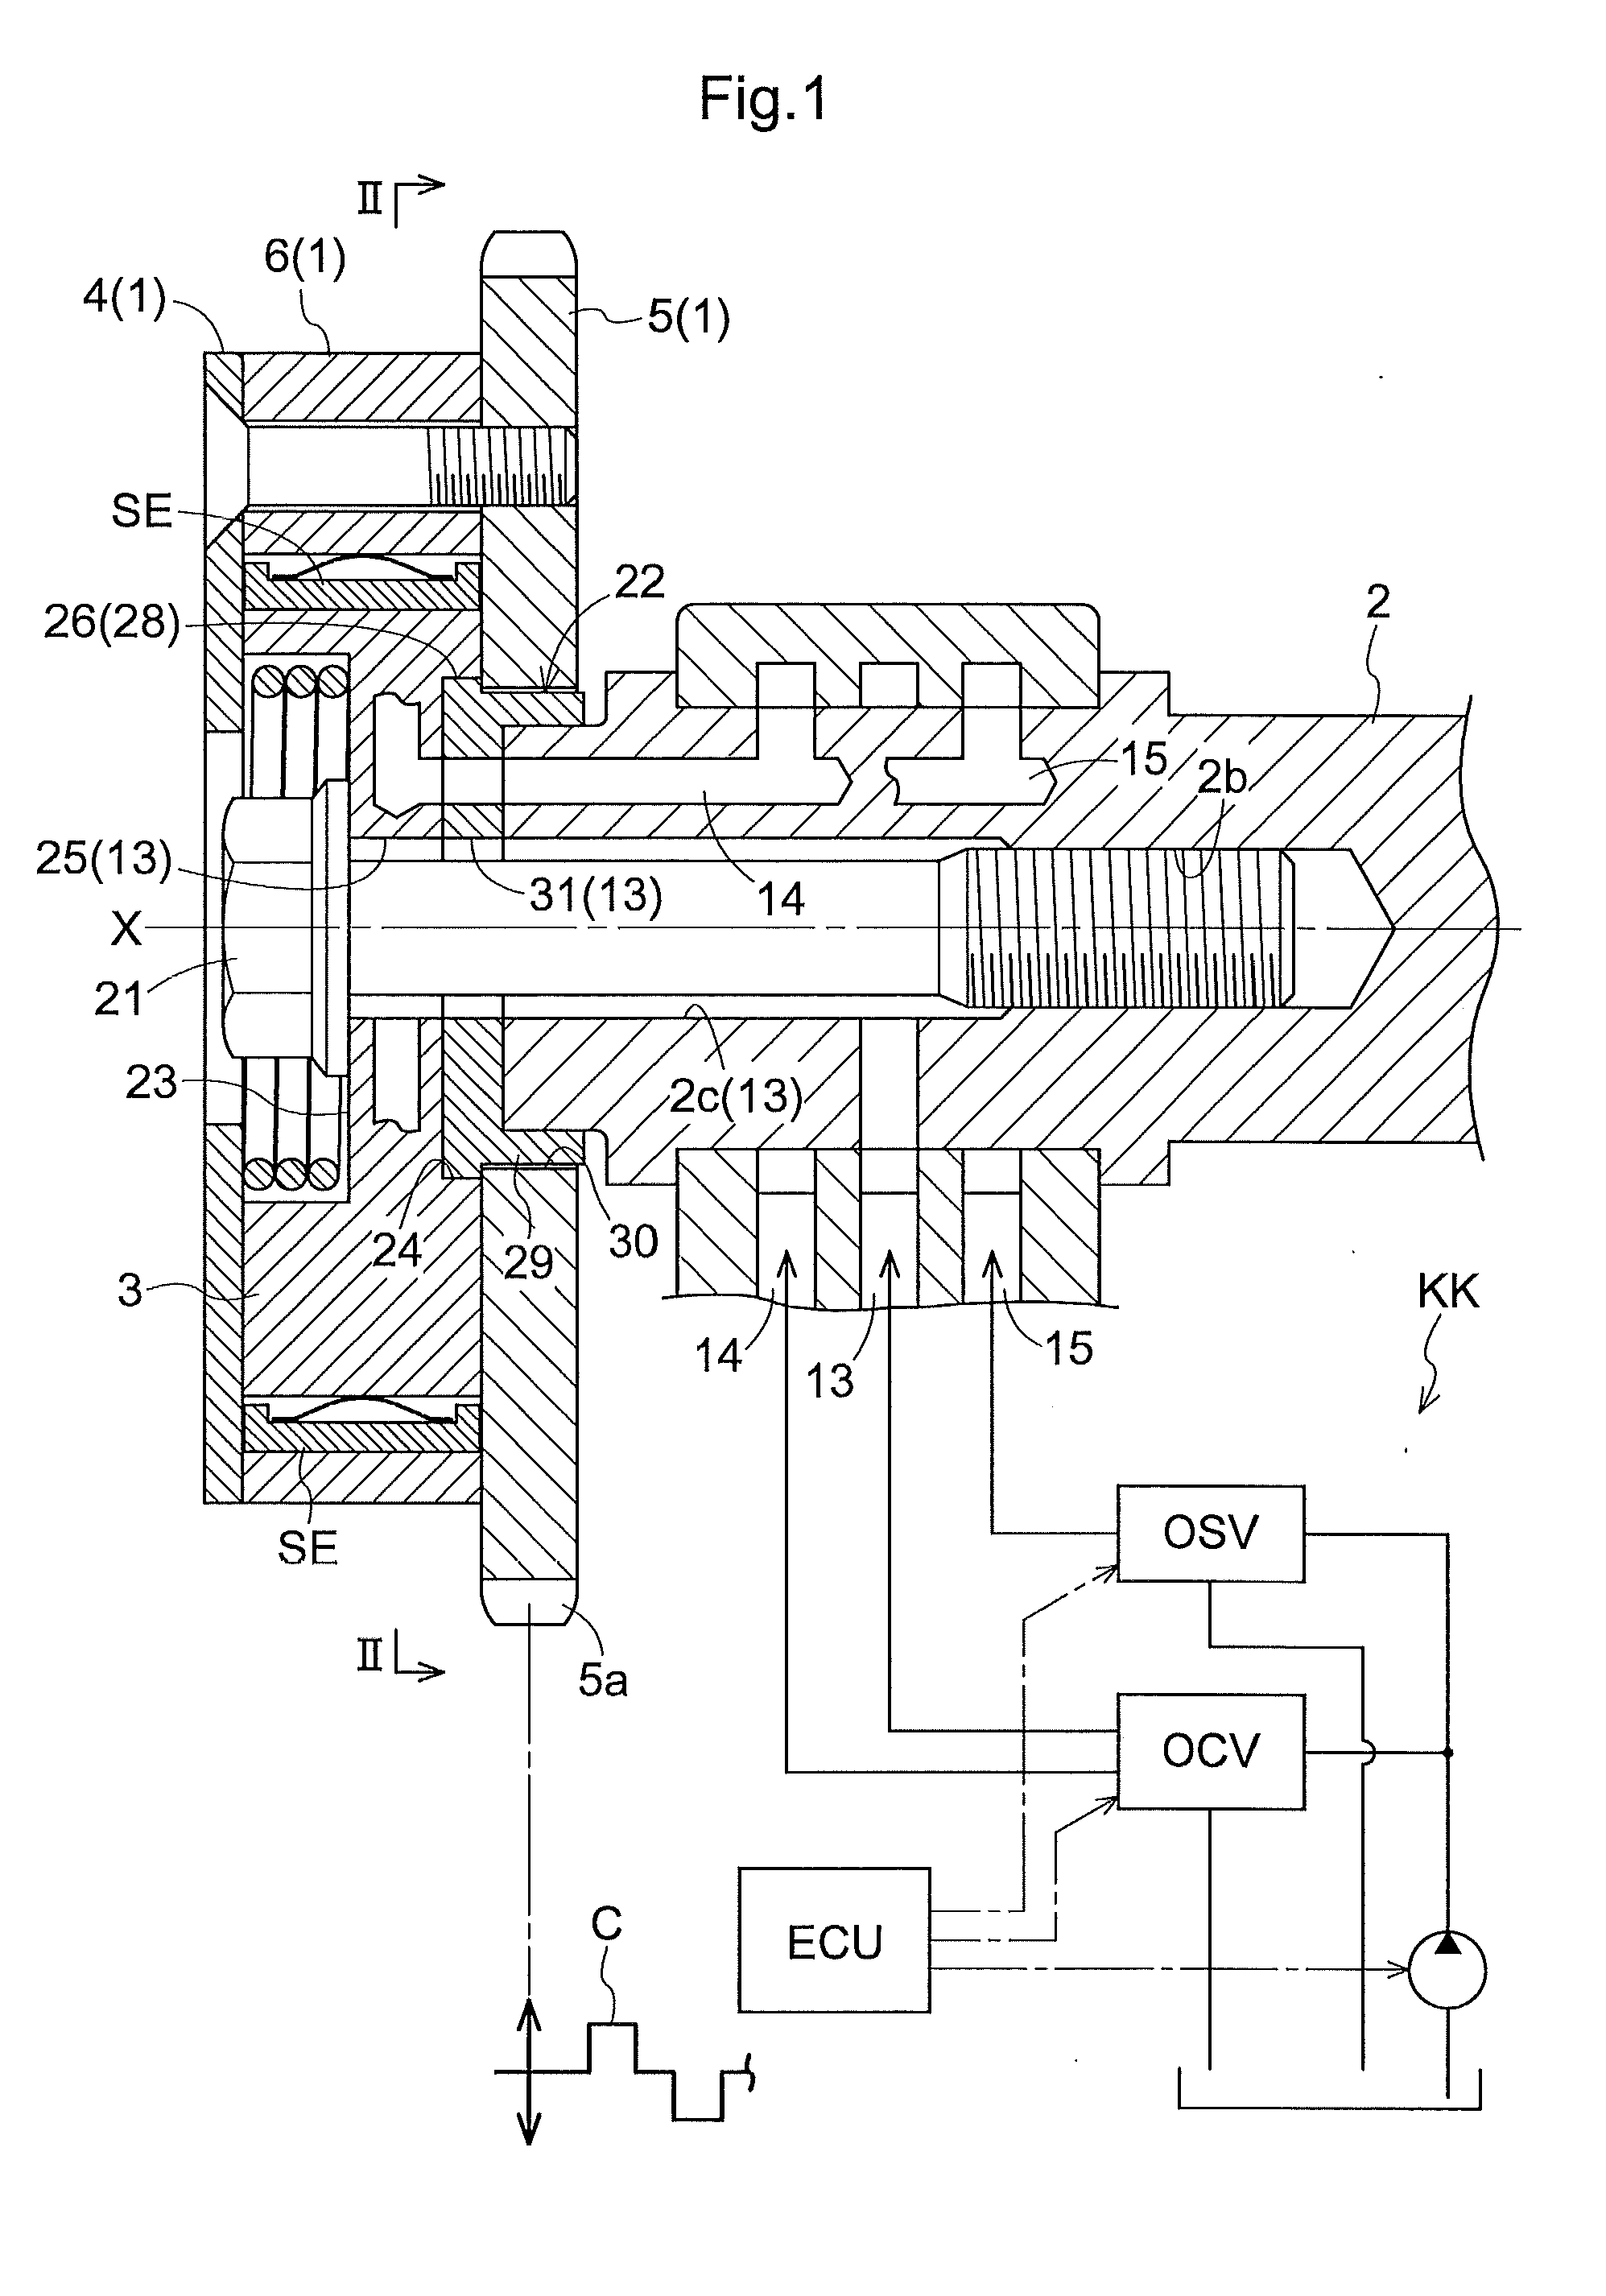 Valve timing control device